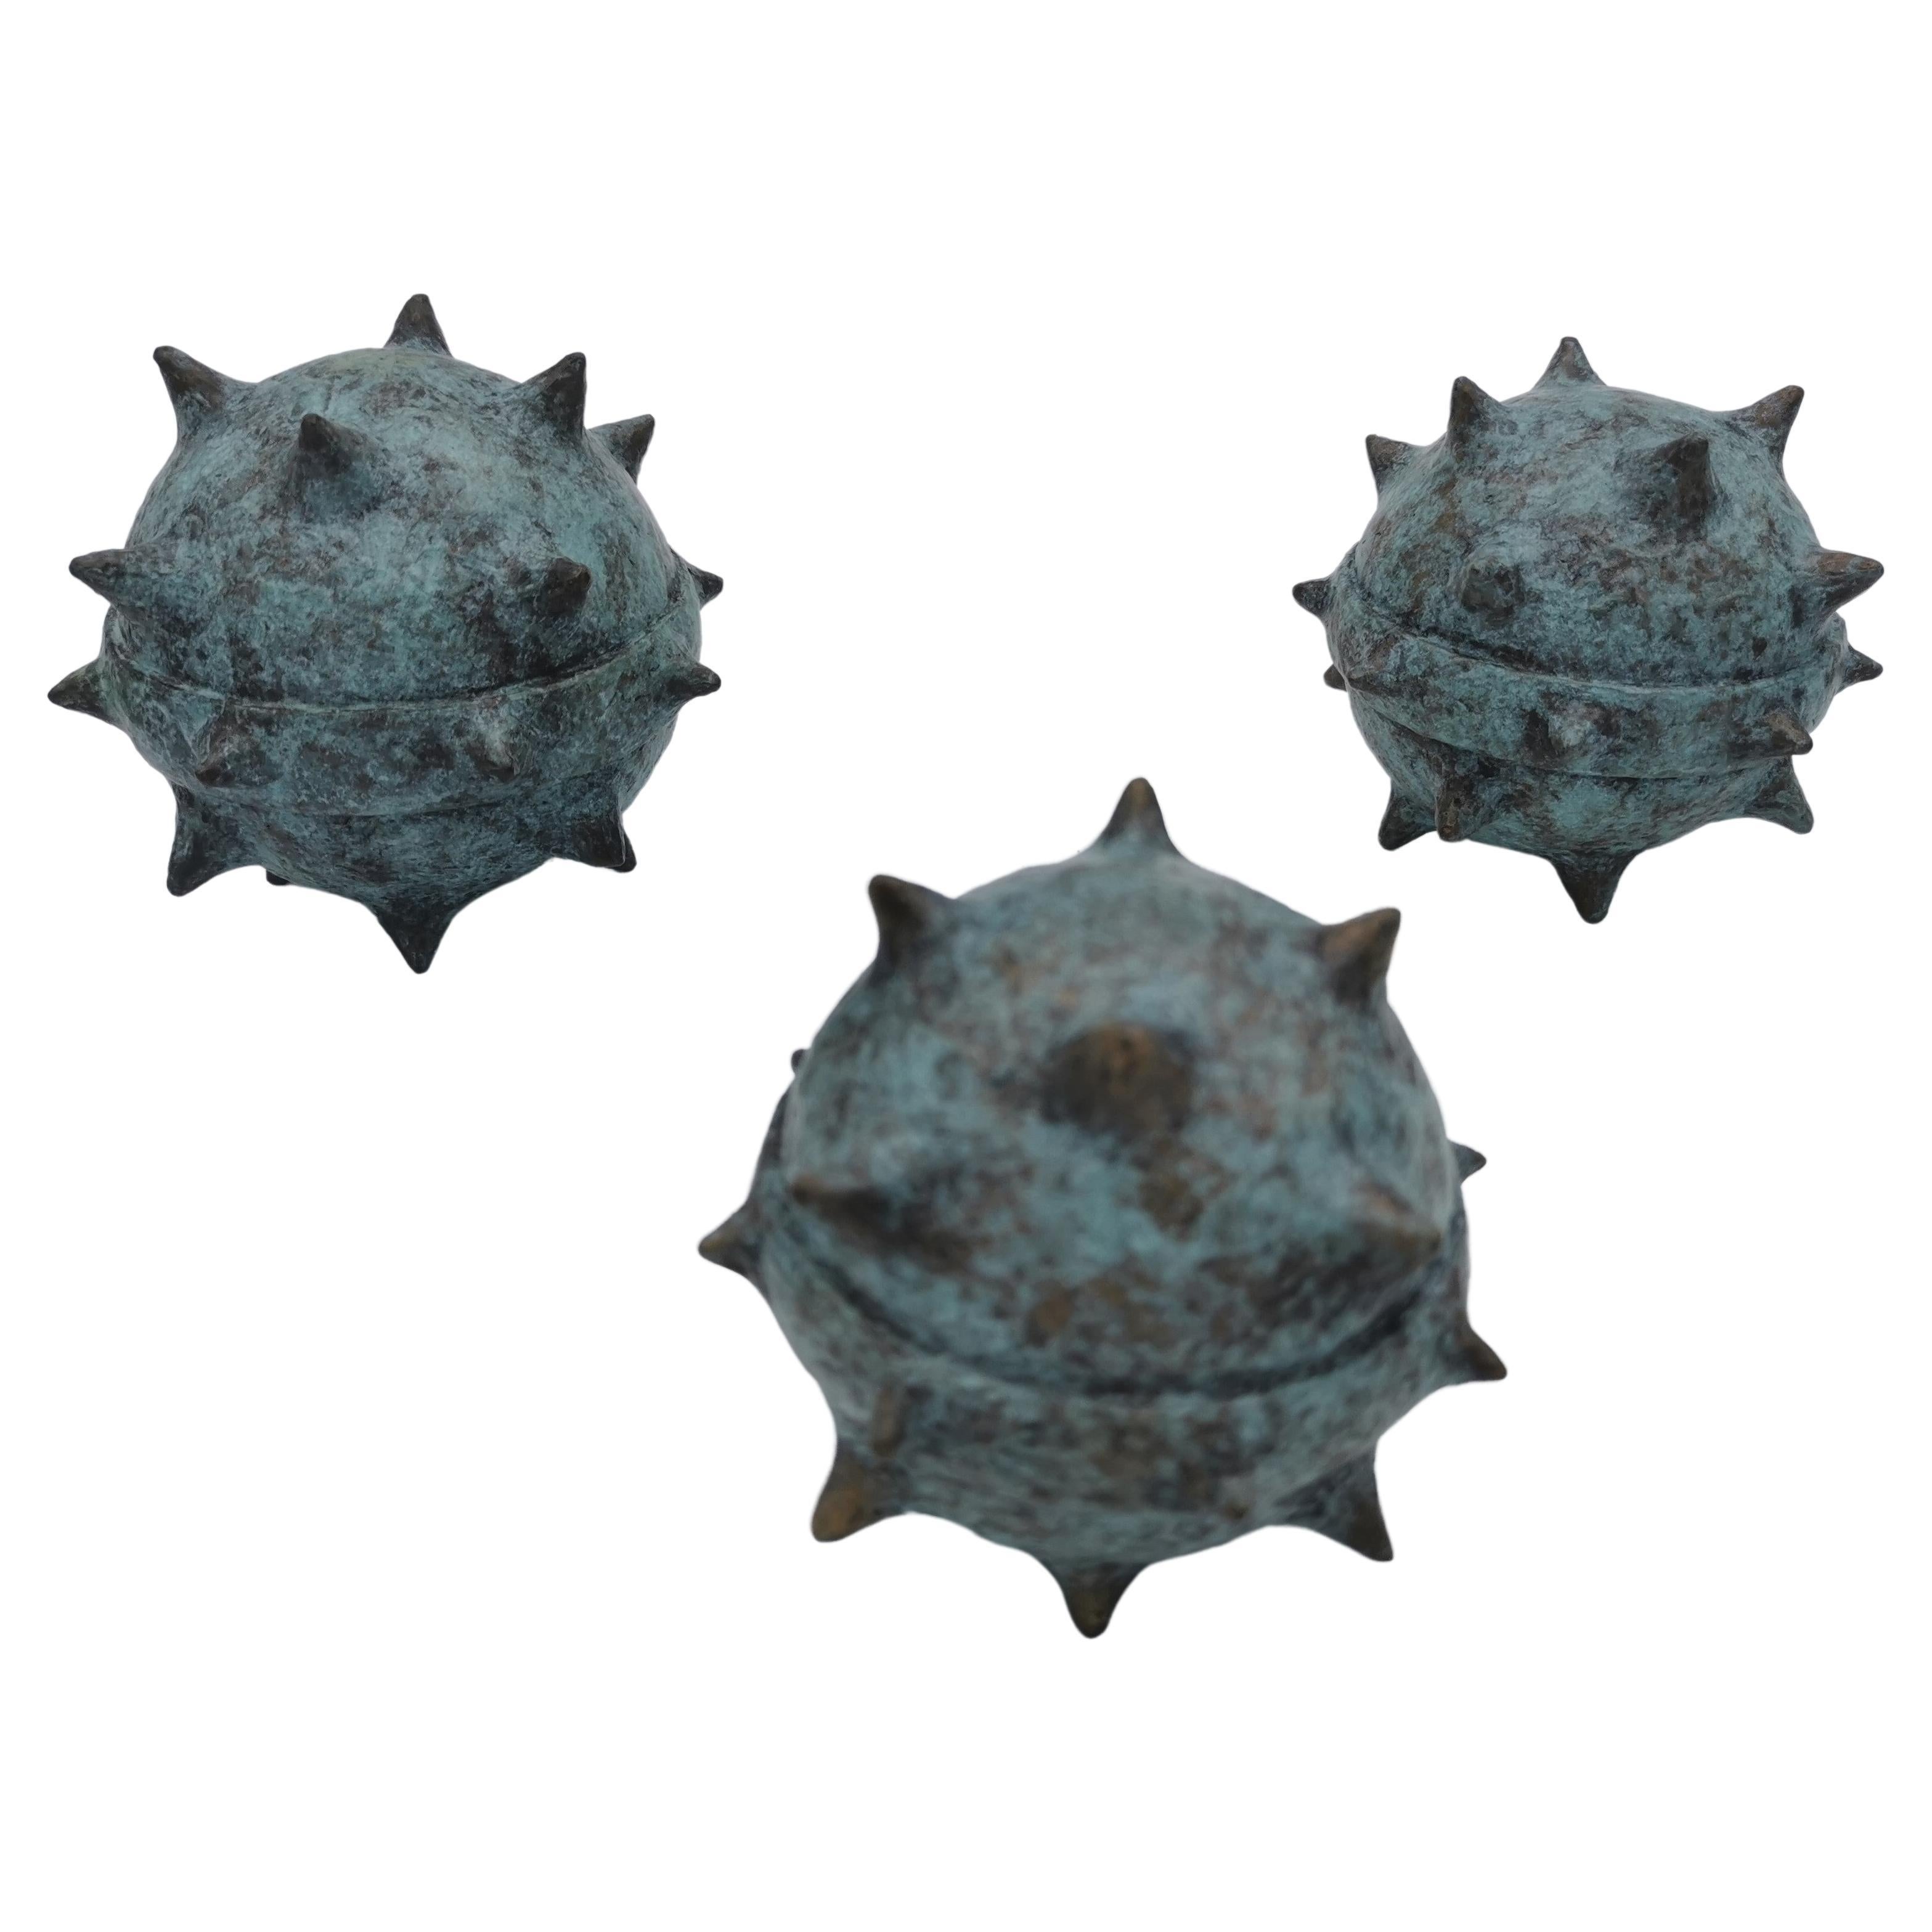 Set of 3 Bronze Decorative Objects "ROMA" Collection (VG) Sphaerae Limited Ed. For Sale